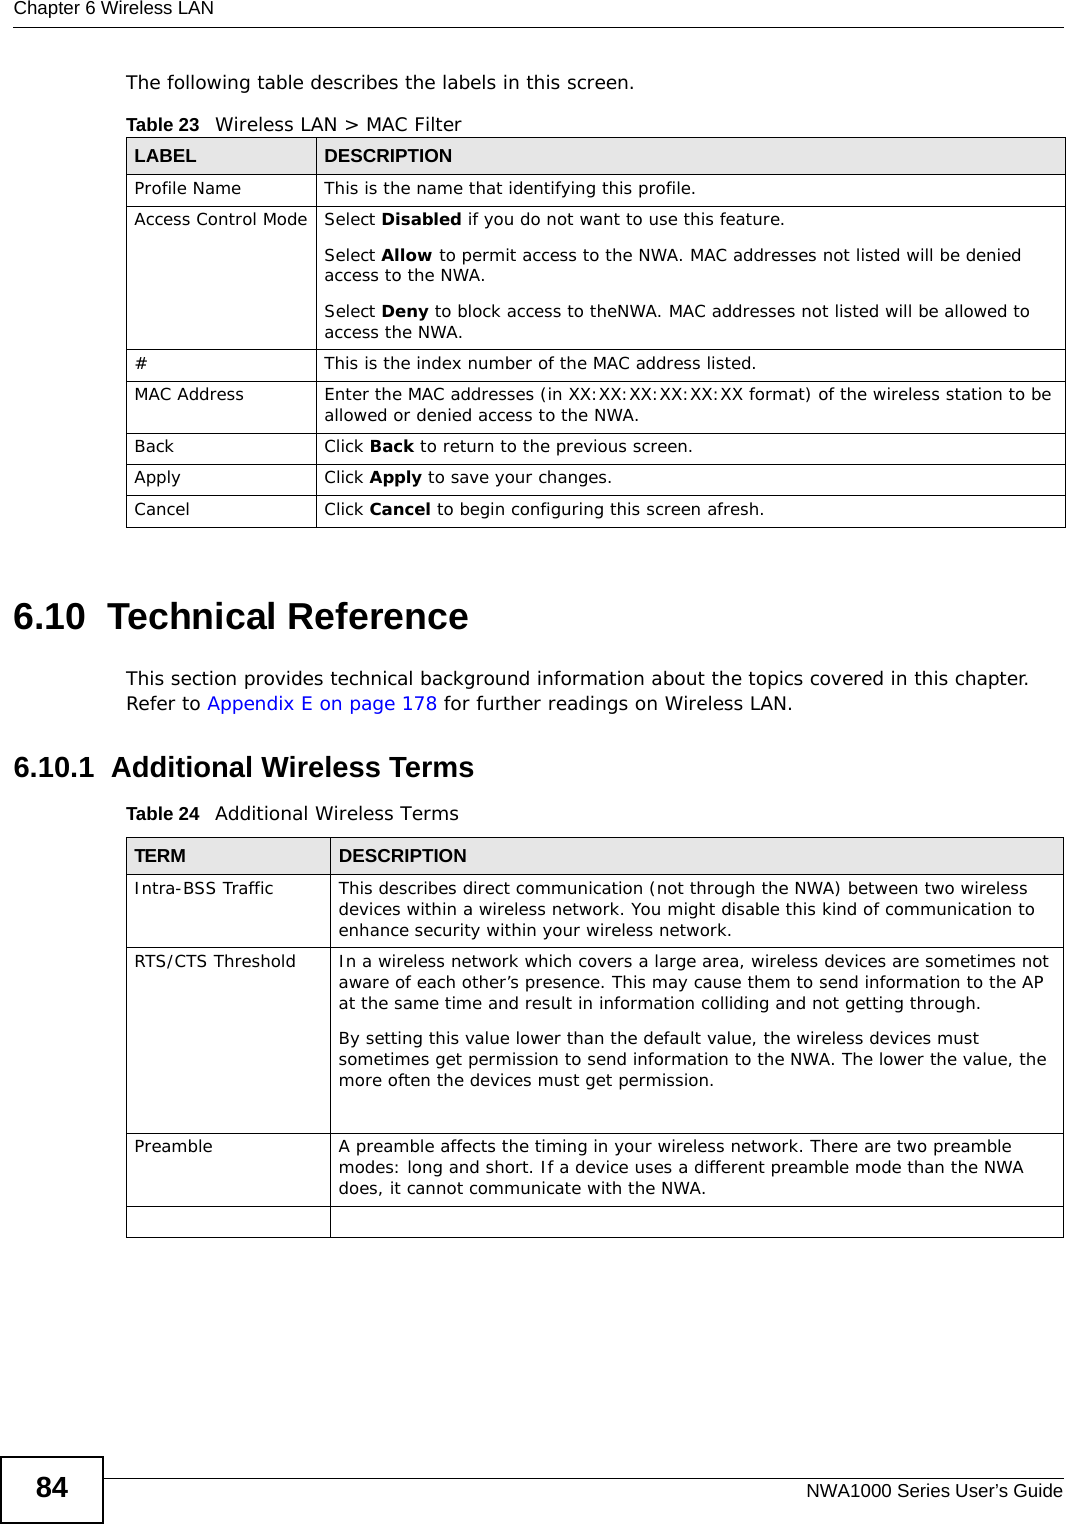 Chapter 6 Wireless LANNWA1000 Series User’s Guide84The following table describes the labels in this screen.6.10  Technical ReferenceThis section provides technical background information about the topics covered in this chapter. Refer to Appendix E on page 178 for further readings on Wireless LAN.6.10.1  Additional Wireless TermsTable 24   Additional Wireless TermsTable 23   Wireless LAN &gt; MAC FilterLABEL DESCRIPTIONProfile Name This is the name that identifying this profile.Access Control Mode Select Disabled if you do not want to use this feature.Select Allow to permit access to the NWA. MAC addresses not listed will be denied access to the NWA.Select Deny to block access to theNWA. MAC addresses not listed will be allowed to access the NWA.#This is the index number of the MAC address listed.MAC Address Enter the MAC addresses (in XX:XX:XX:XX:XX:XX format) of the wireless station to be allowed or denied access to the NWA.Back Click Back to return to the previous screen.Apply Click Apply to save your changes.Cancel Click Cancel to begin configuring this screen afresh.TERM DESCRIPTIONIntra-BSS Traffic This describes direct communication (not through the NWA) between two wireless devices within a wireless network. You might disable this kind of communication to enhance security within your wireless network.RTS/CTS Threshold In a wireless network which covers a large area, wireless devices are sometimes not aware of each other’s presence. This may cause them to send information to the AP at the same time and result in information colliding and not getting through.By setting this value lower than the default value, the wireless devices must sometimes get permission to send information to the NWA. The lower the value, the more often the devices must get permission.Preamble A preamble affects the timing in your wireless network. There are two preamble modes: long and short. If a device uses a different preamble mode than the NWA does, it cannot communicate with the NWA.